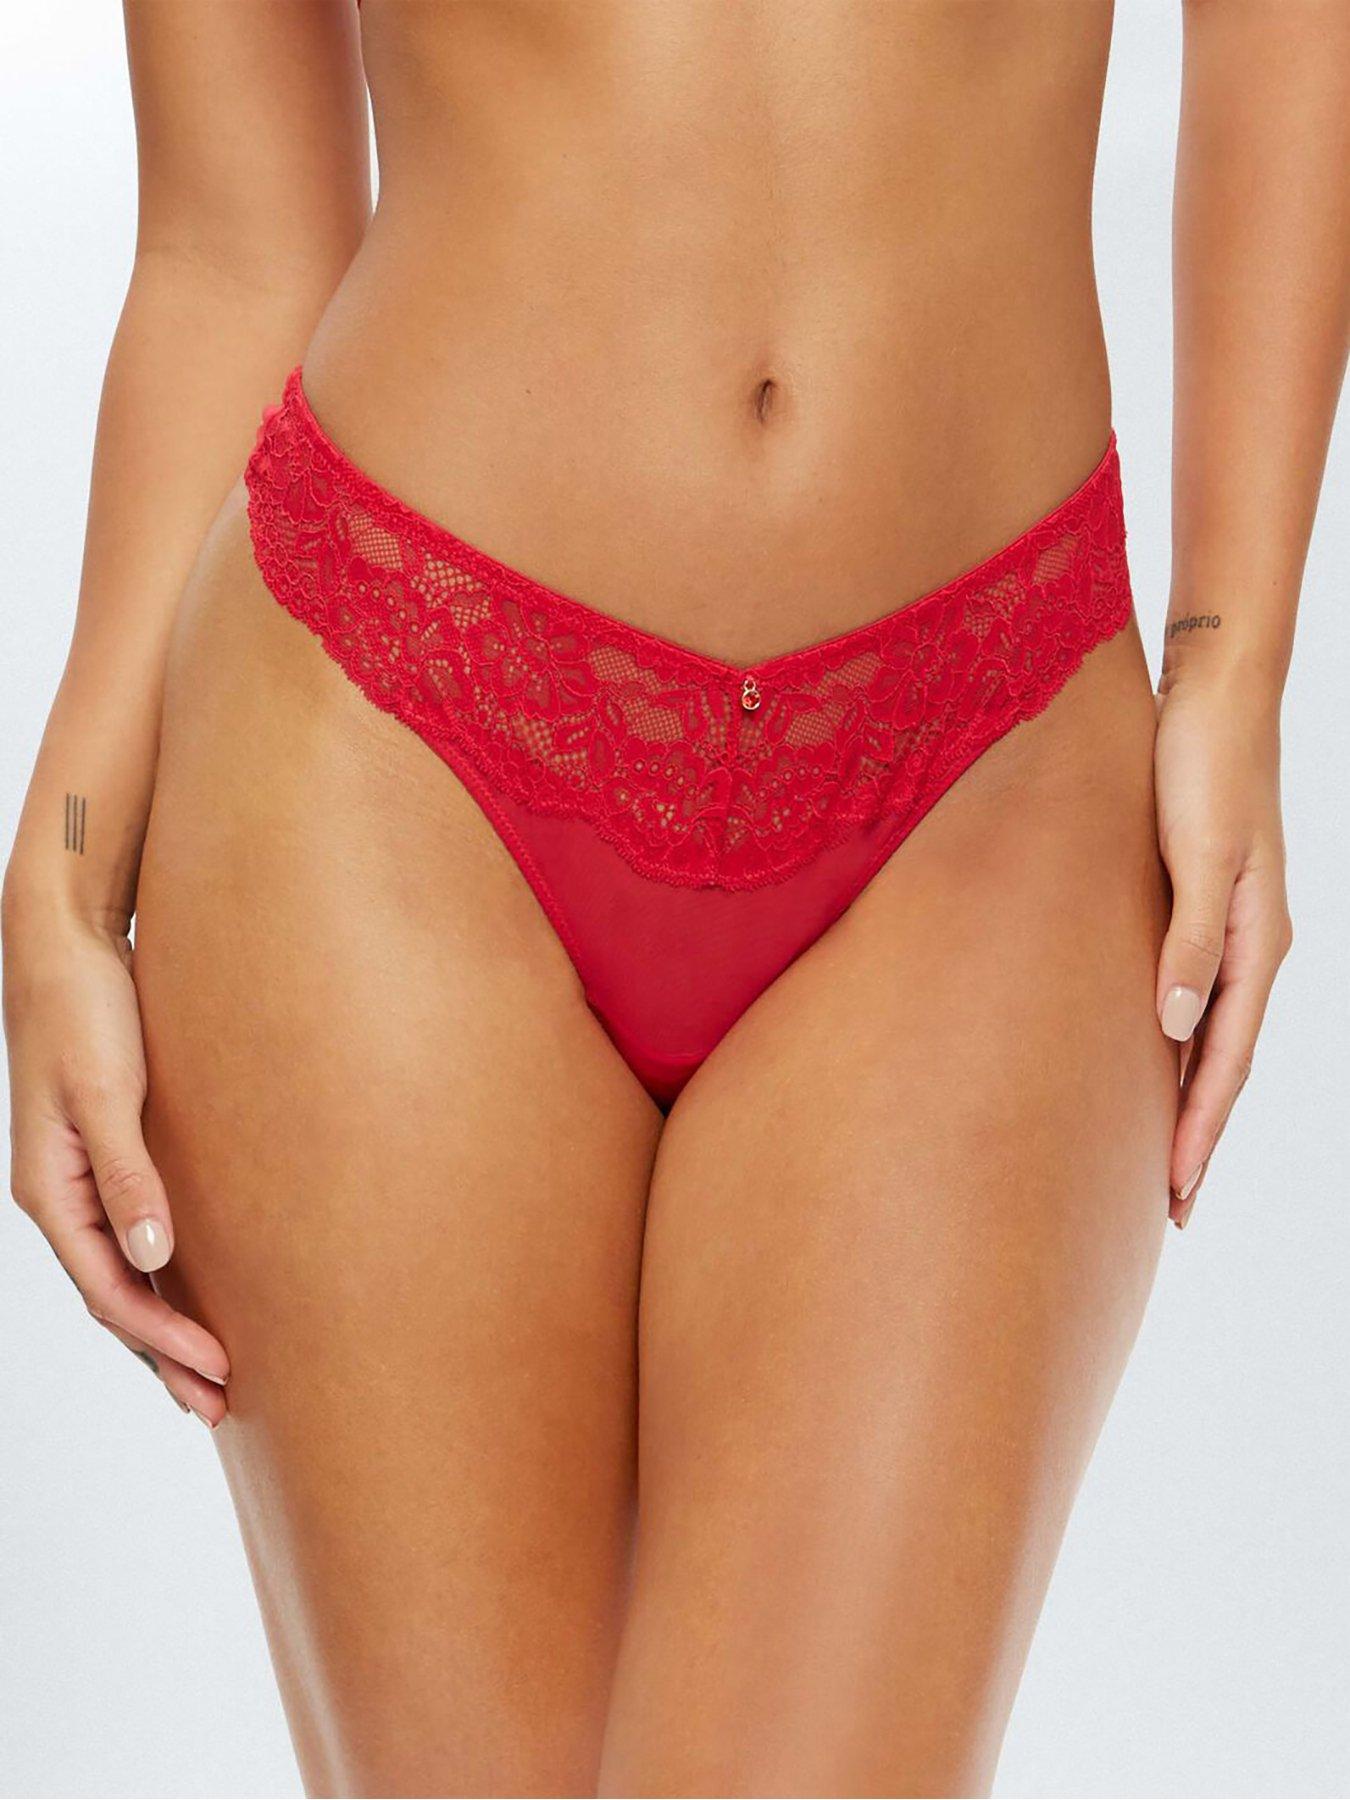 Crotchless panties - Sexy lingerie - Sexy anniversary gift - Inspire Uplift